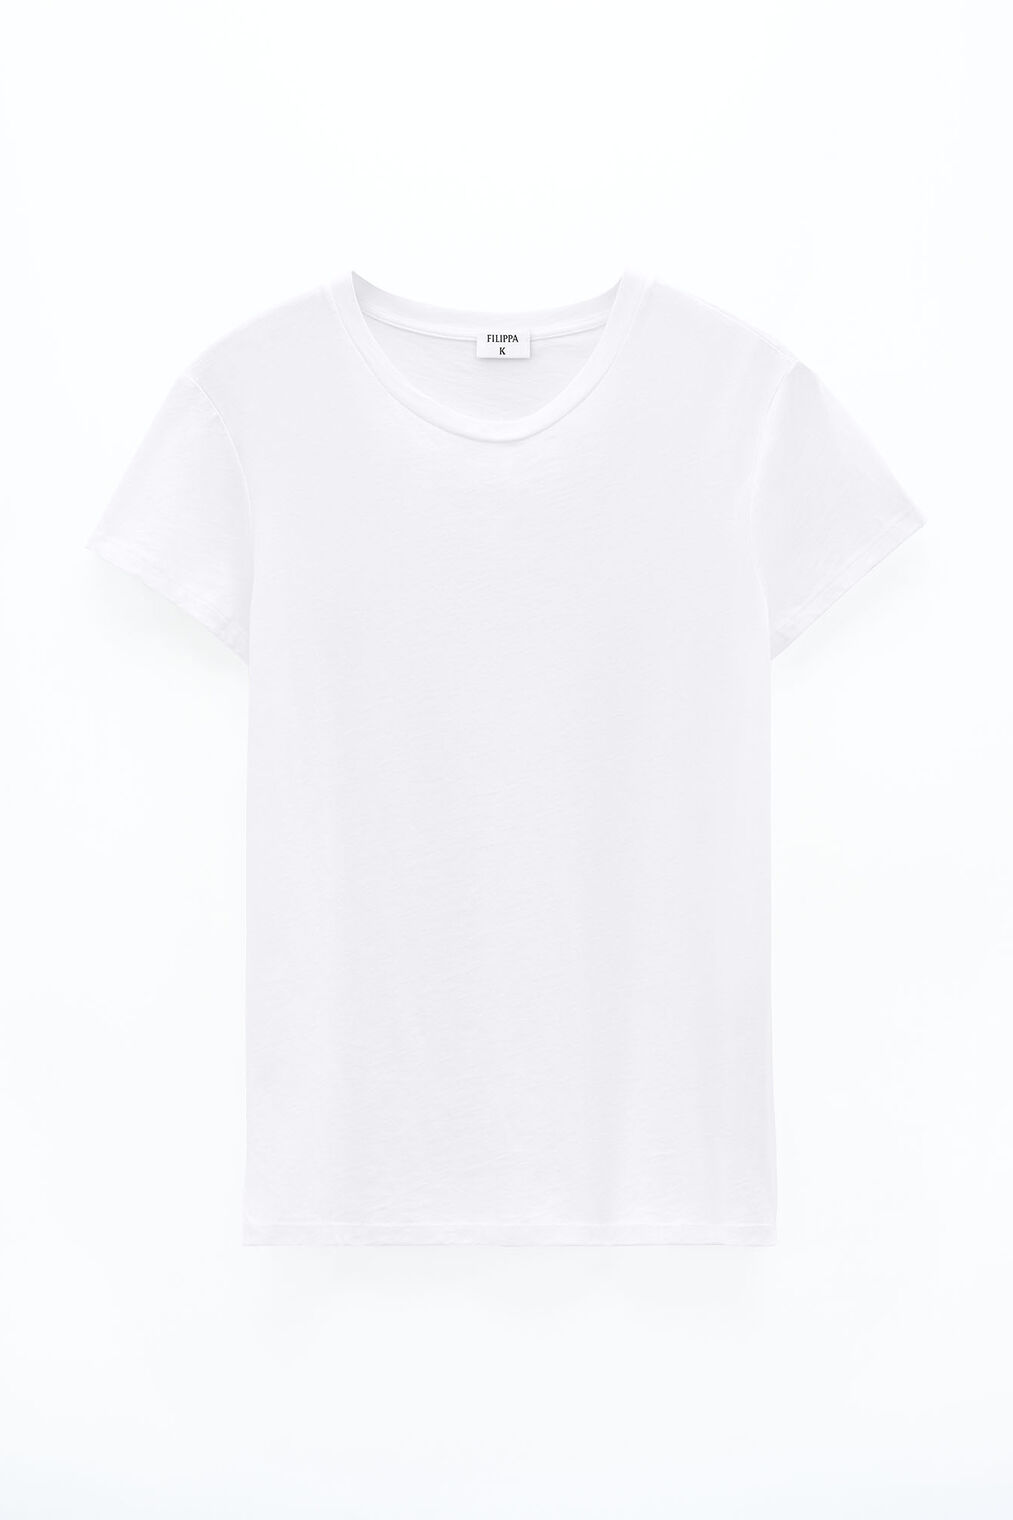 Here Are 10 Places To Shop For The Perfect White T-Shirt